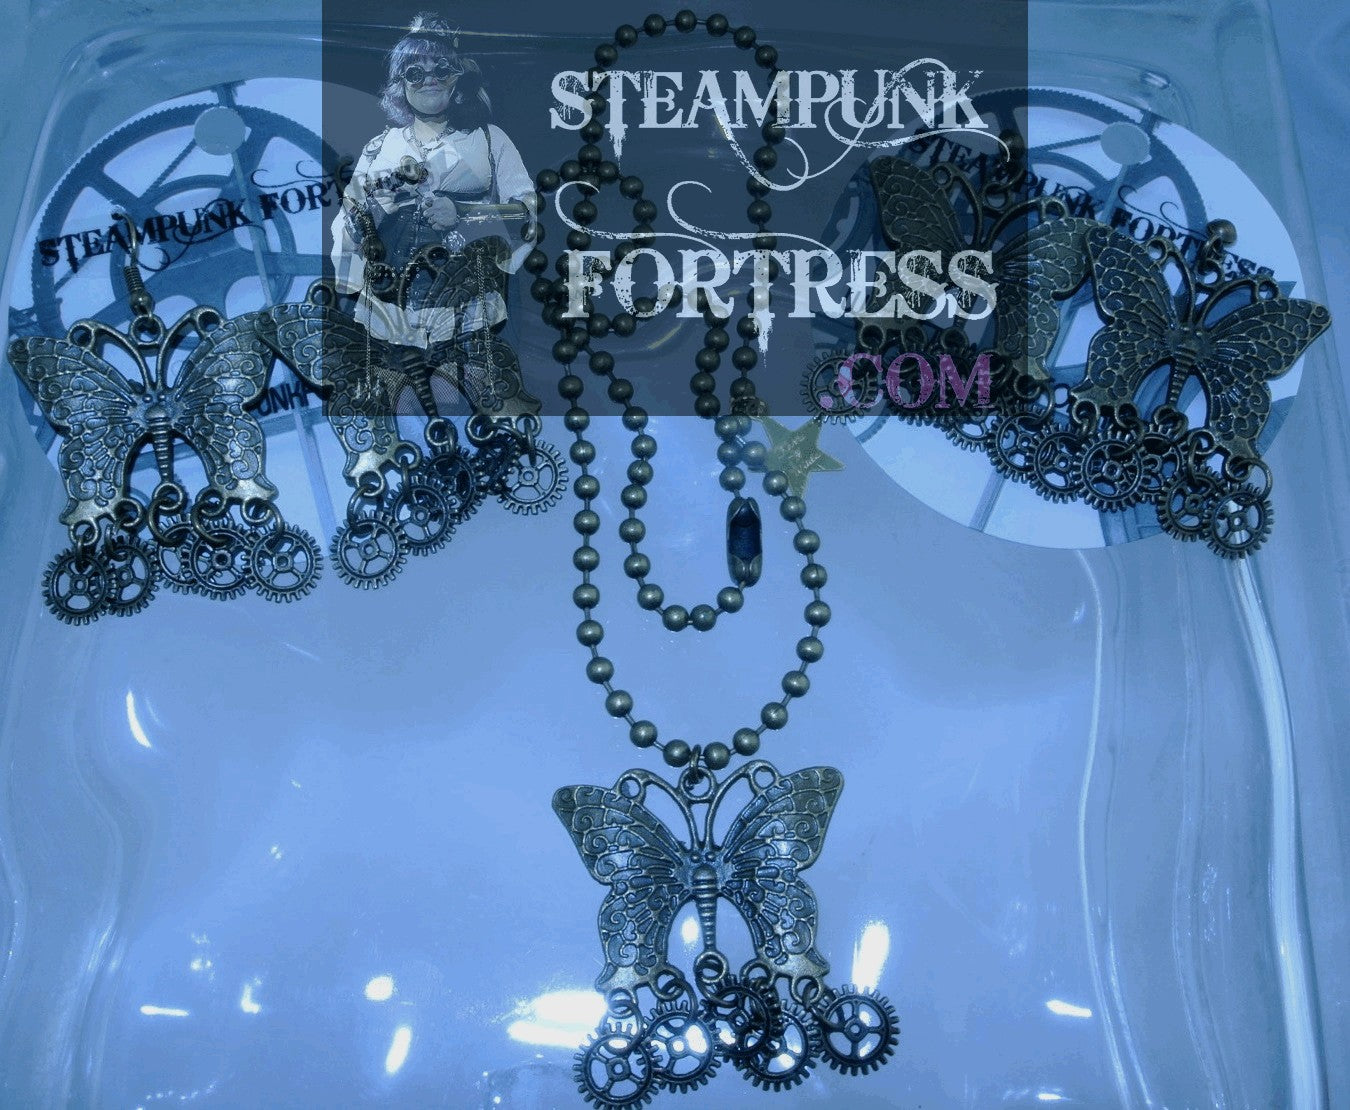 BRASS BUTTERFLY 5 4 ARM GEARS DROP NECKLACE SET AVAILABLE STARR WILDE STEAMPUNK FORTRESS